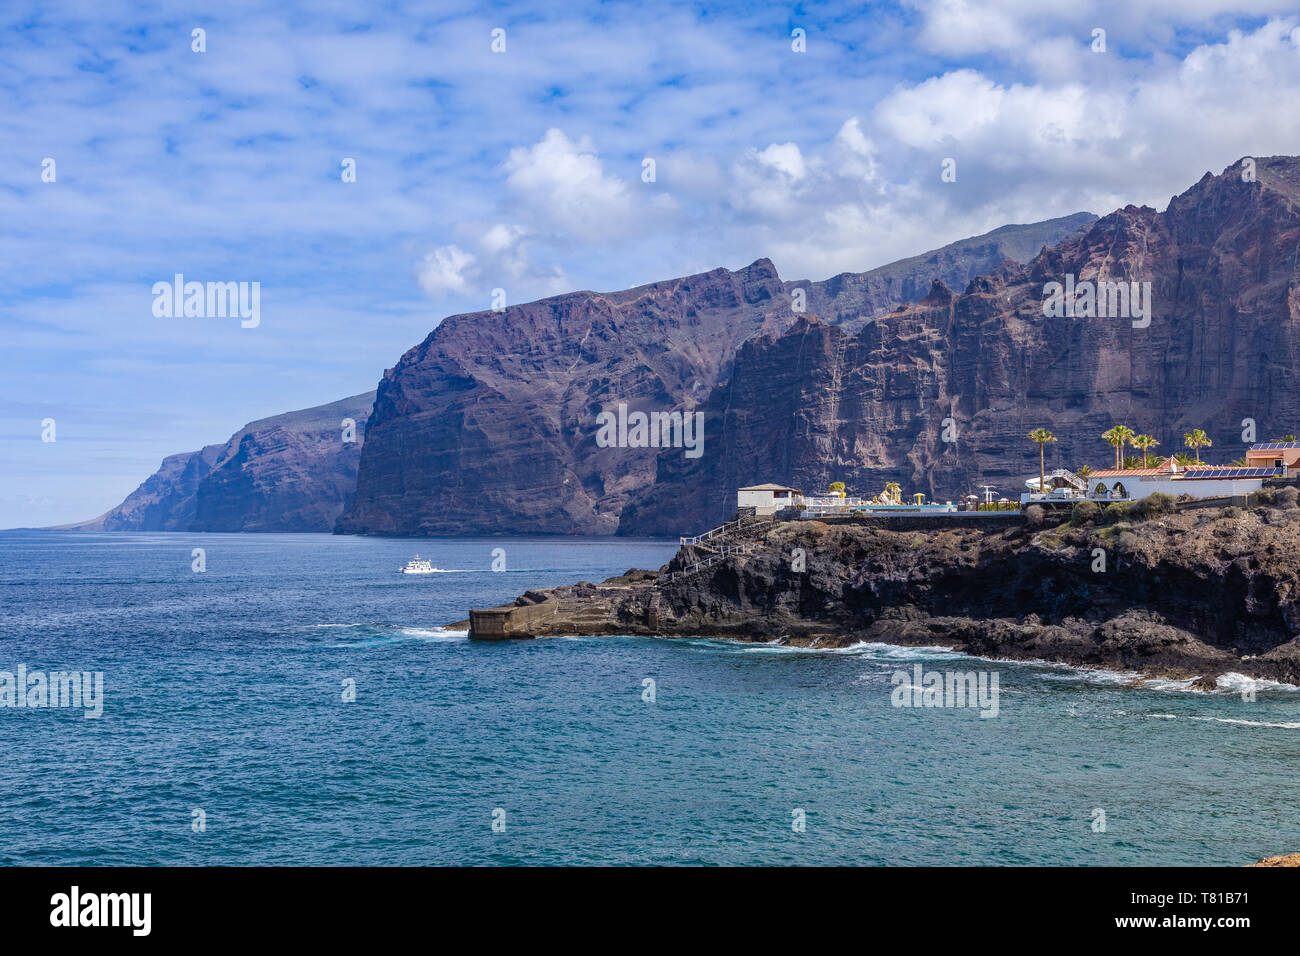 Puerto de Santiago and Los Gigantes in the background, Tenerife, Canary Islands, Spain Stock Photo